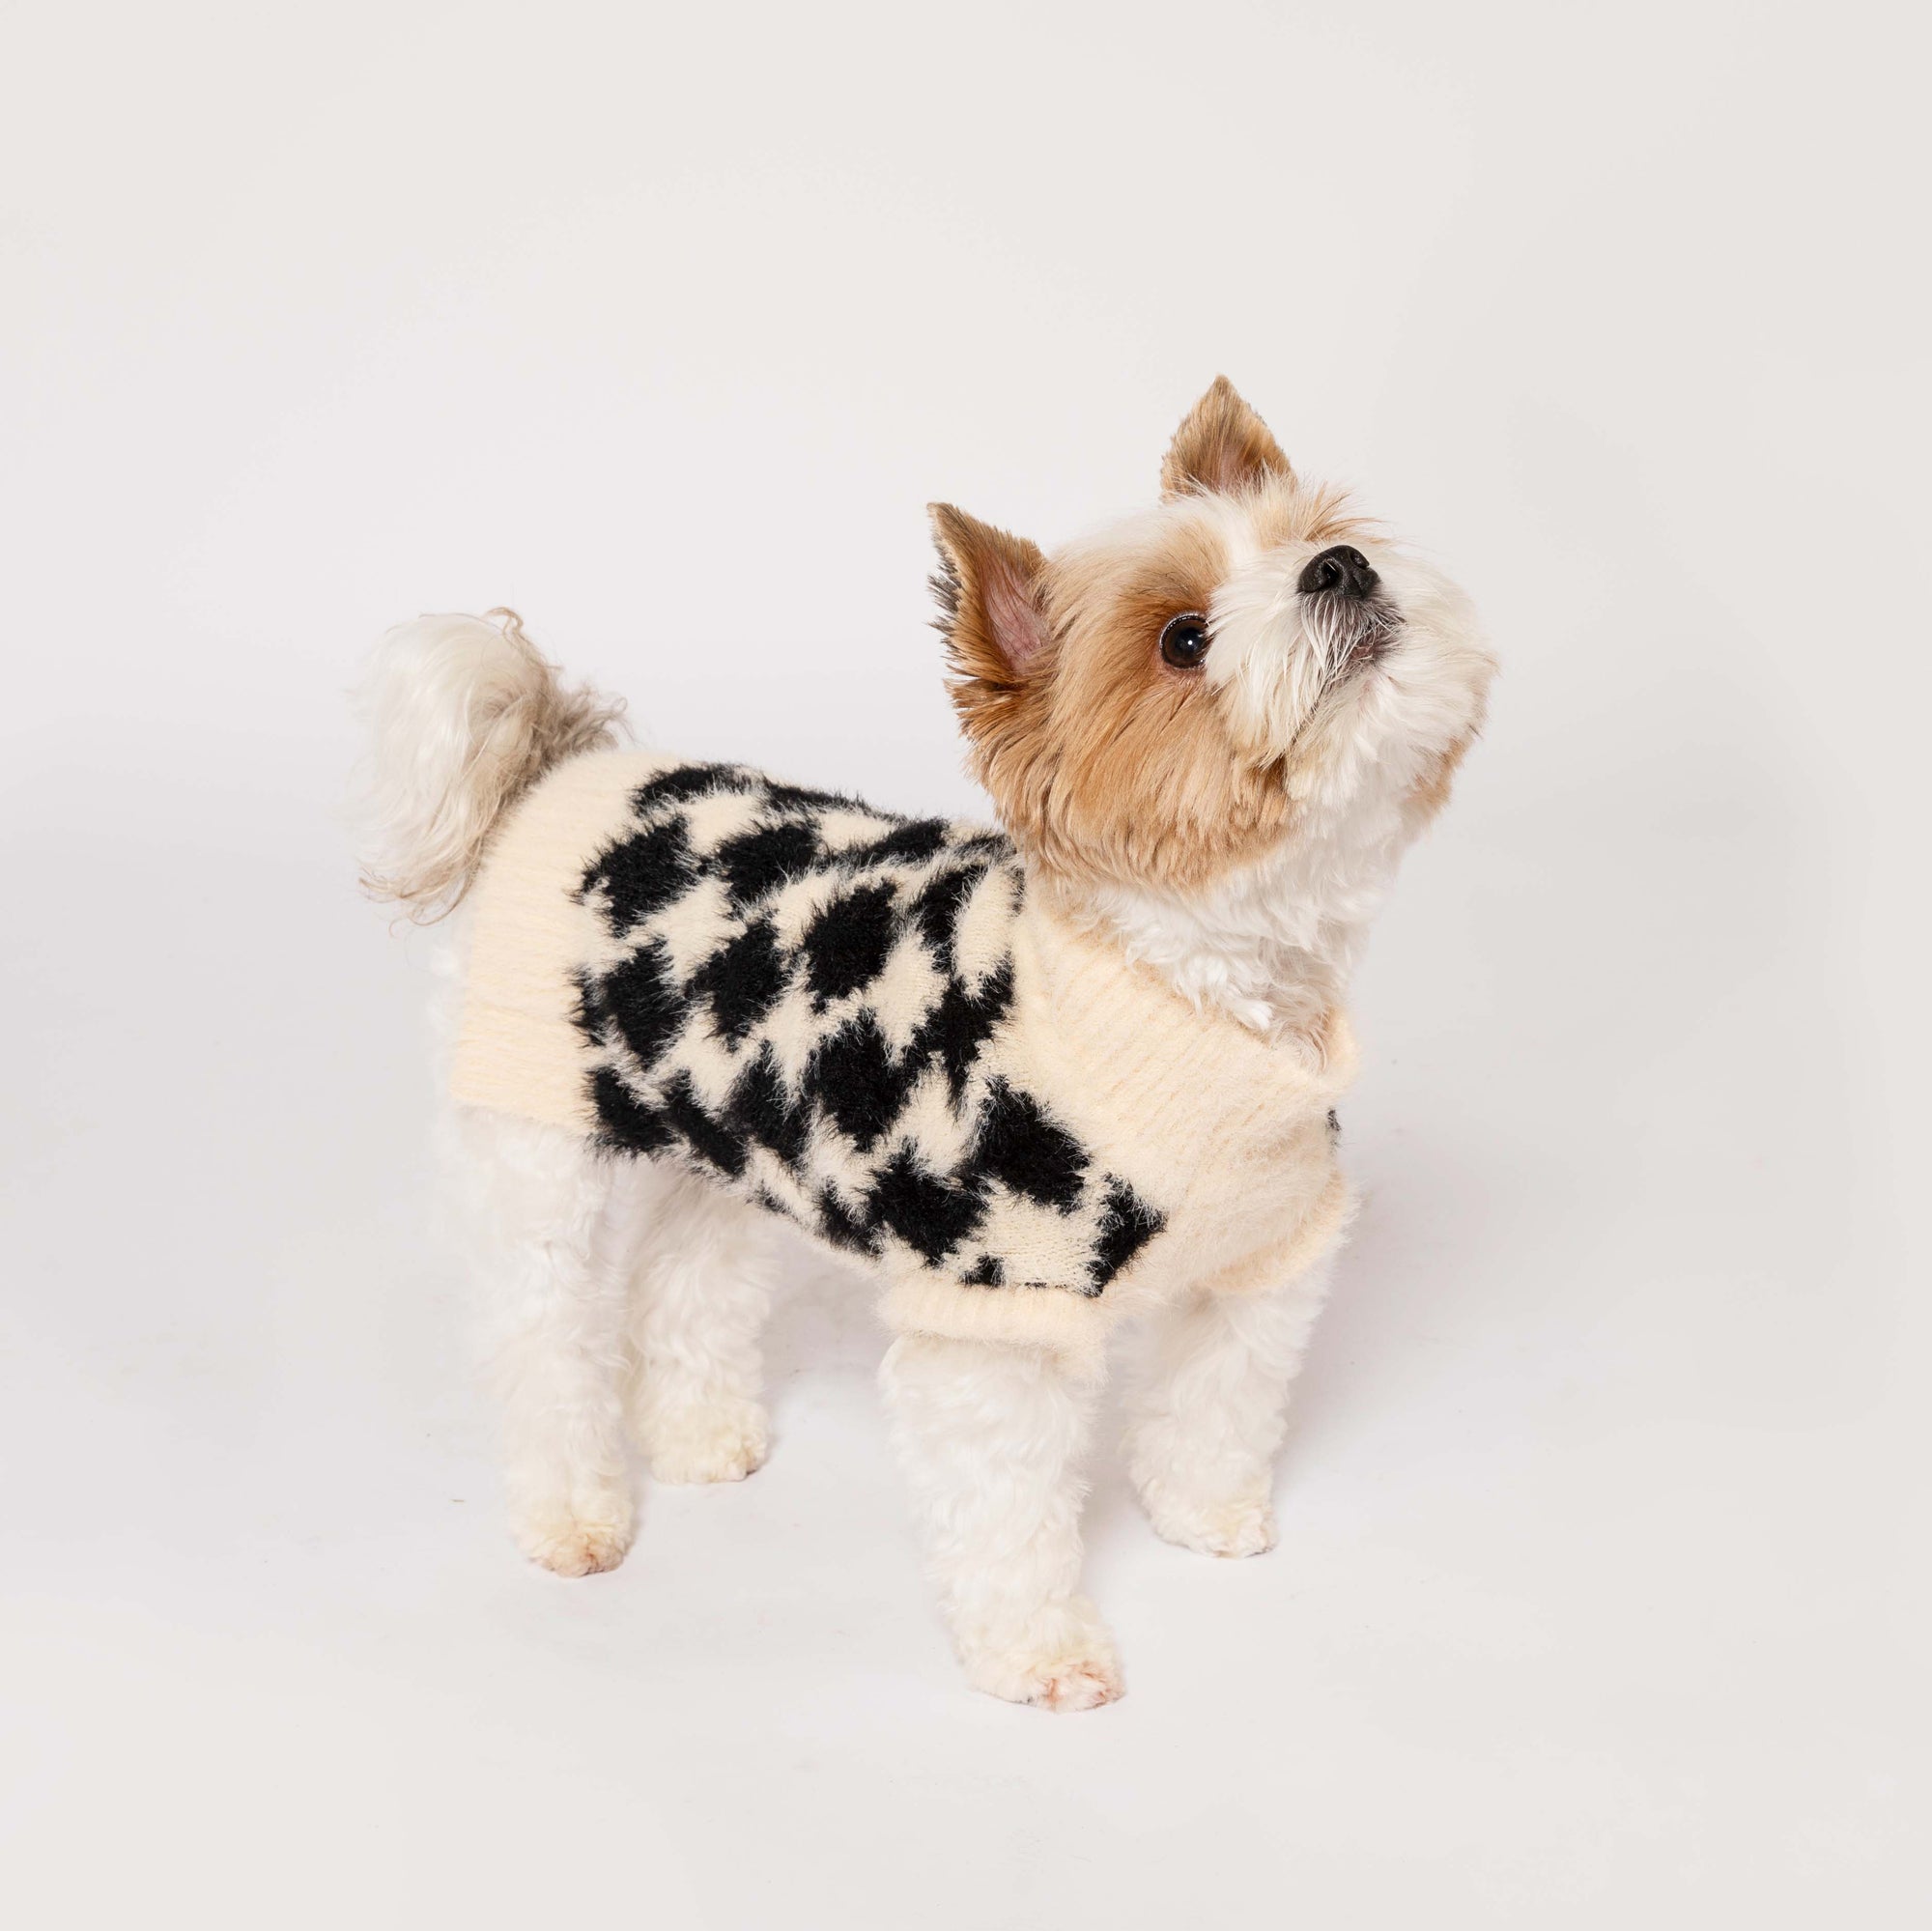 Alert and adorable Yorkshire Terrier mix wearing a beige sweater with black houndstooth design, looking upwards with curiosity, against a white backdrop.